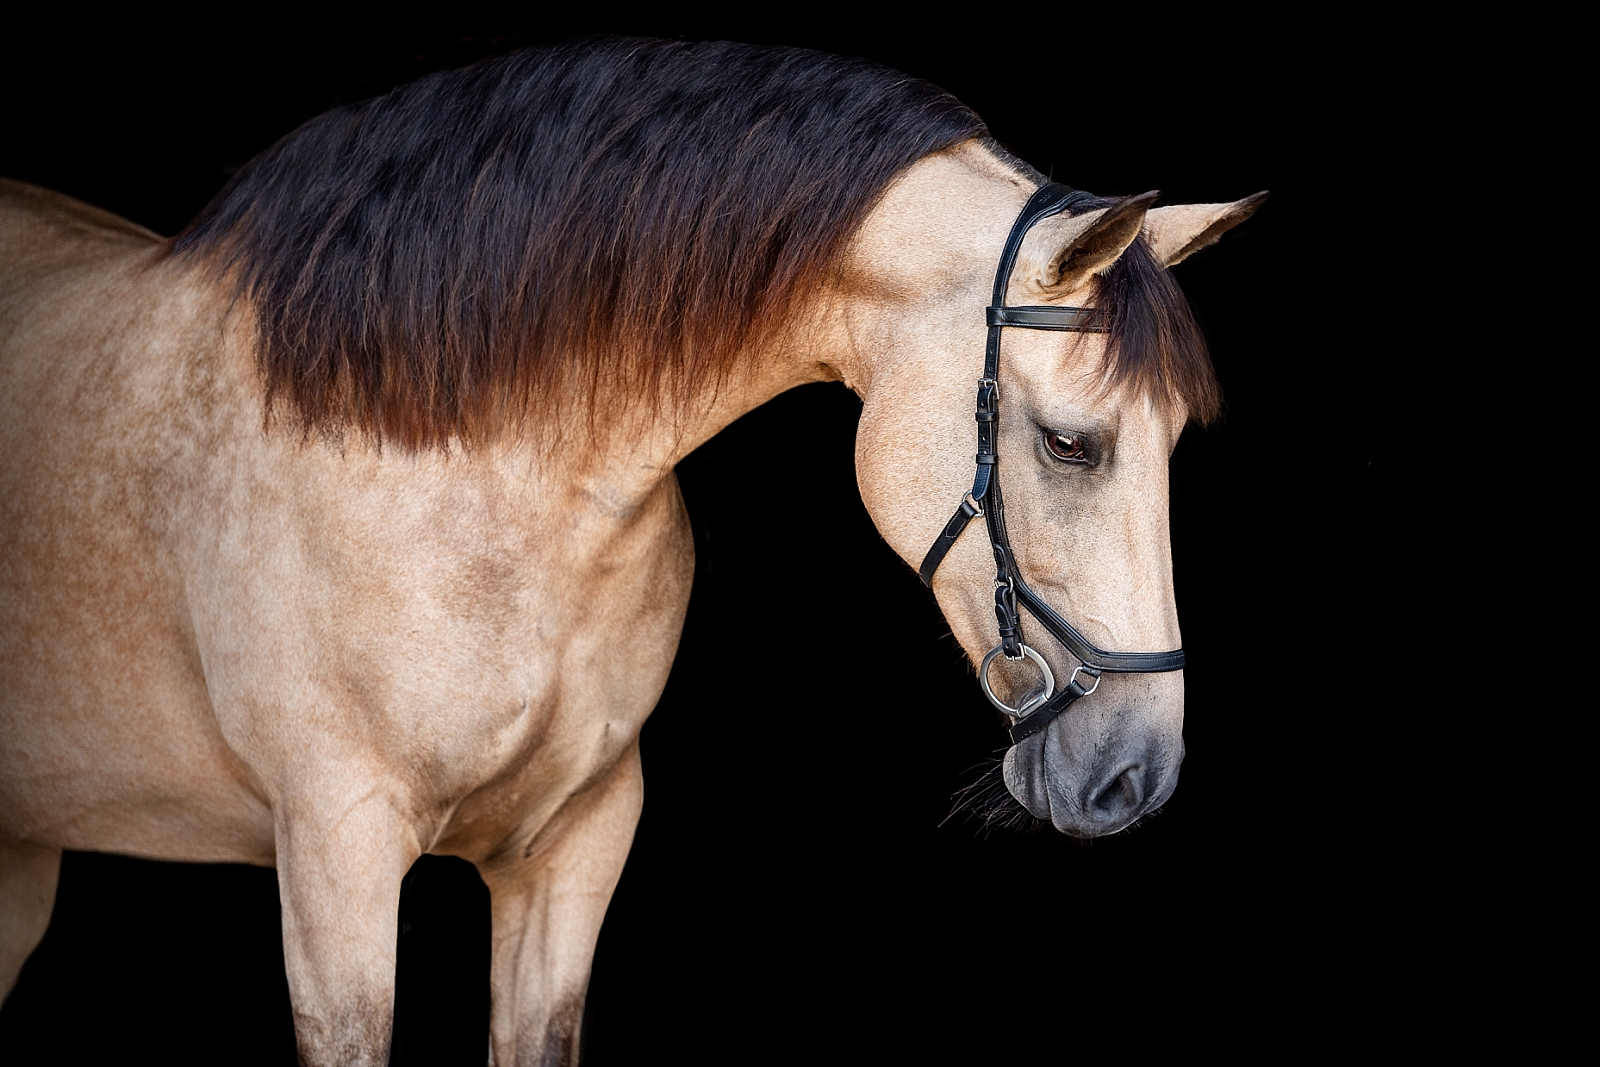 Halley photographed at horse boarding near Tallahassee, FL. Buckskin sporthorse mare.